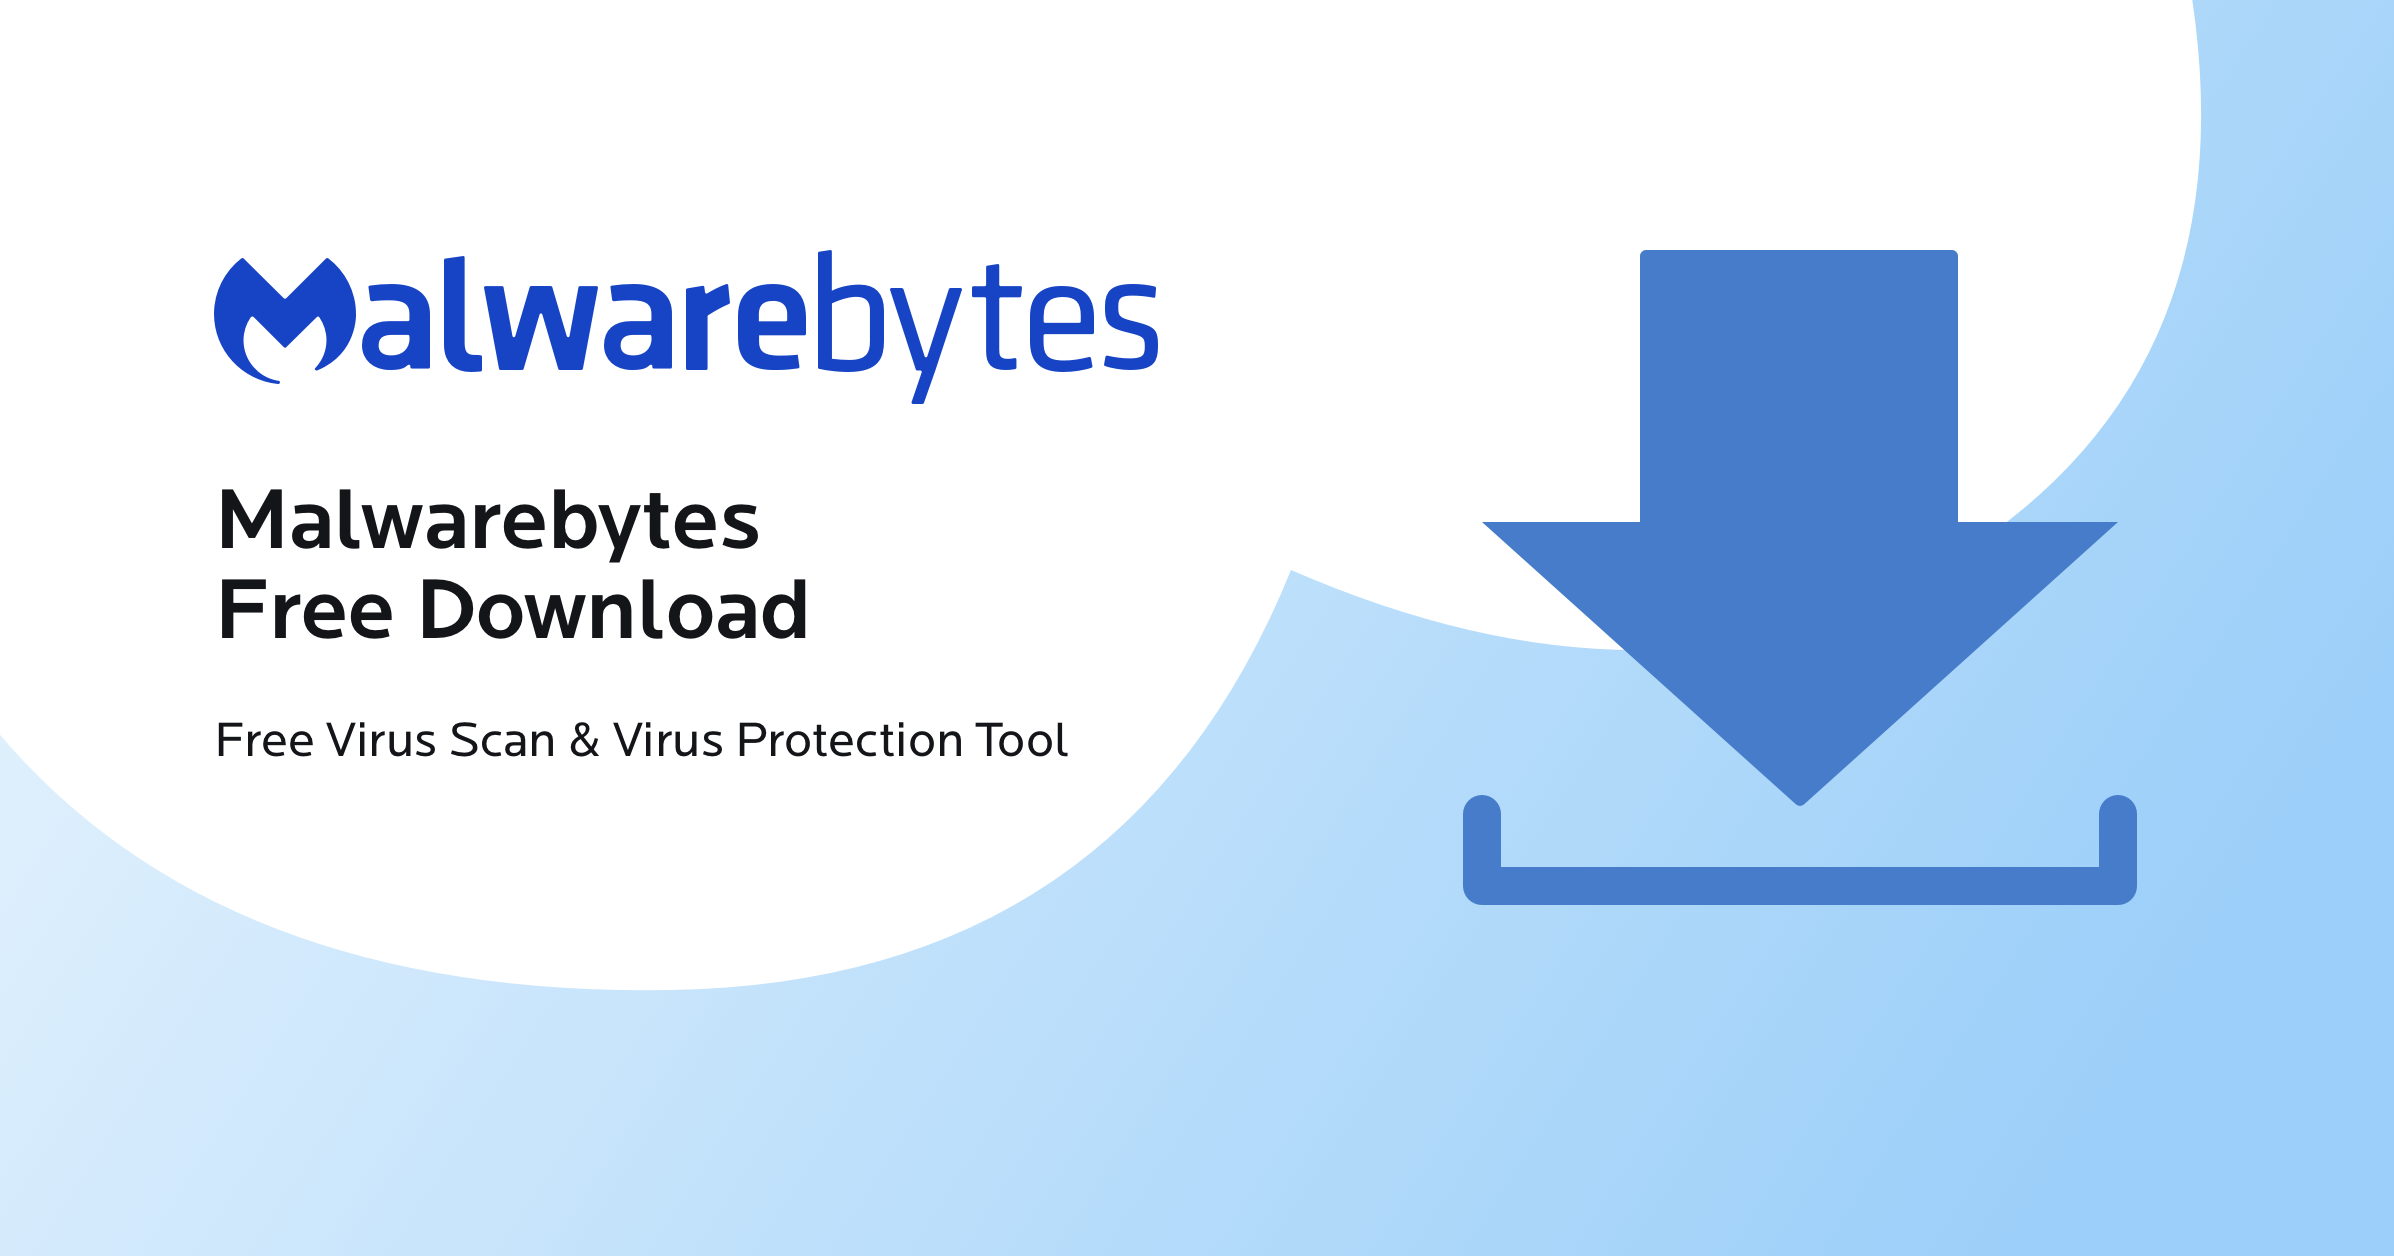 Download and install an anti-malware program such as Malwarebytes
Open the program and run a full system scan